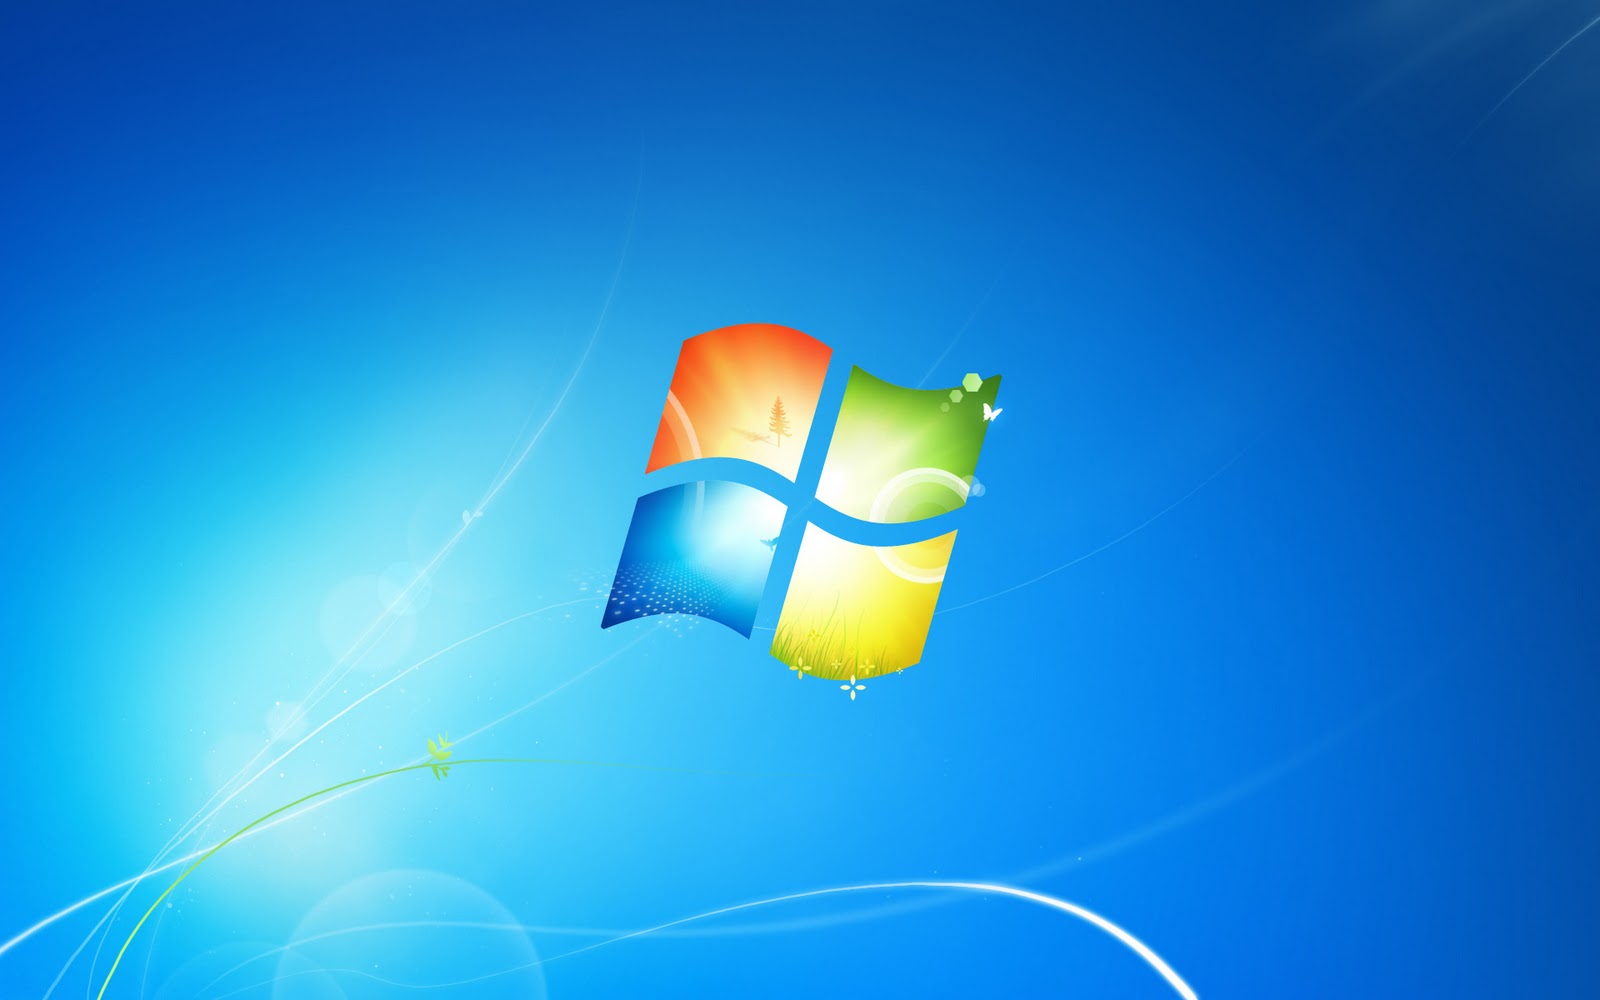 Windows 7 Blue and Light Colored HD Wallpapers  Wallpapers, pictures 